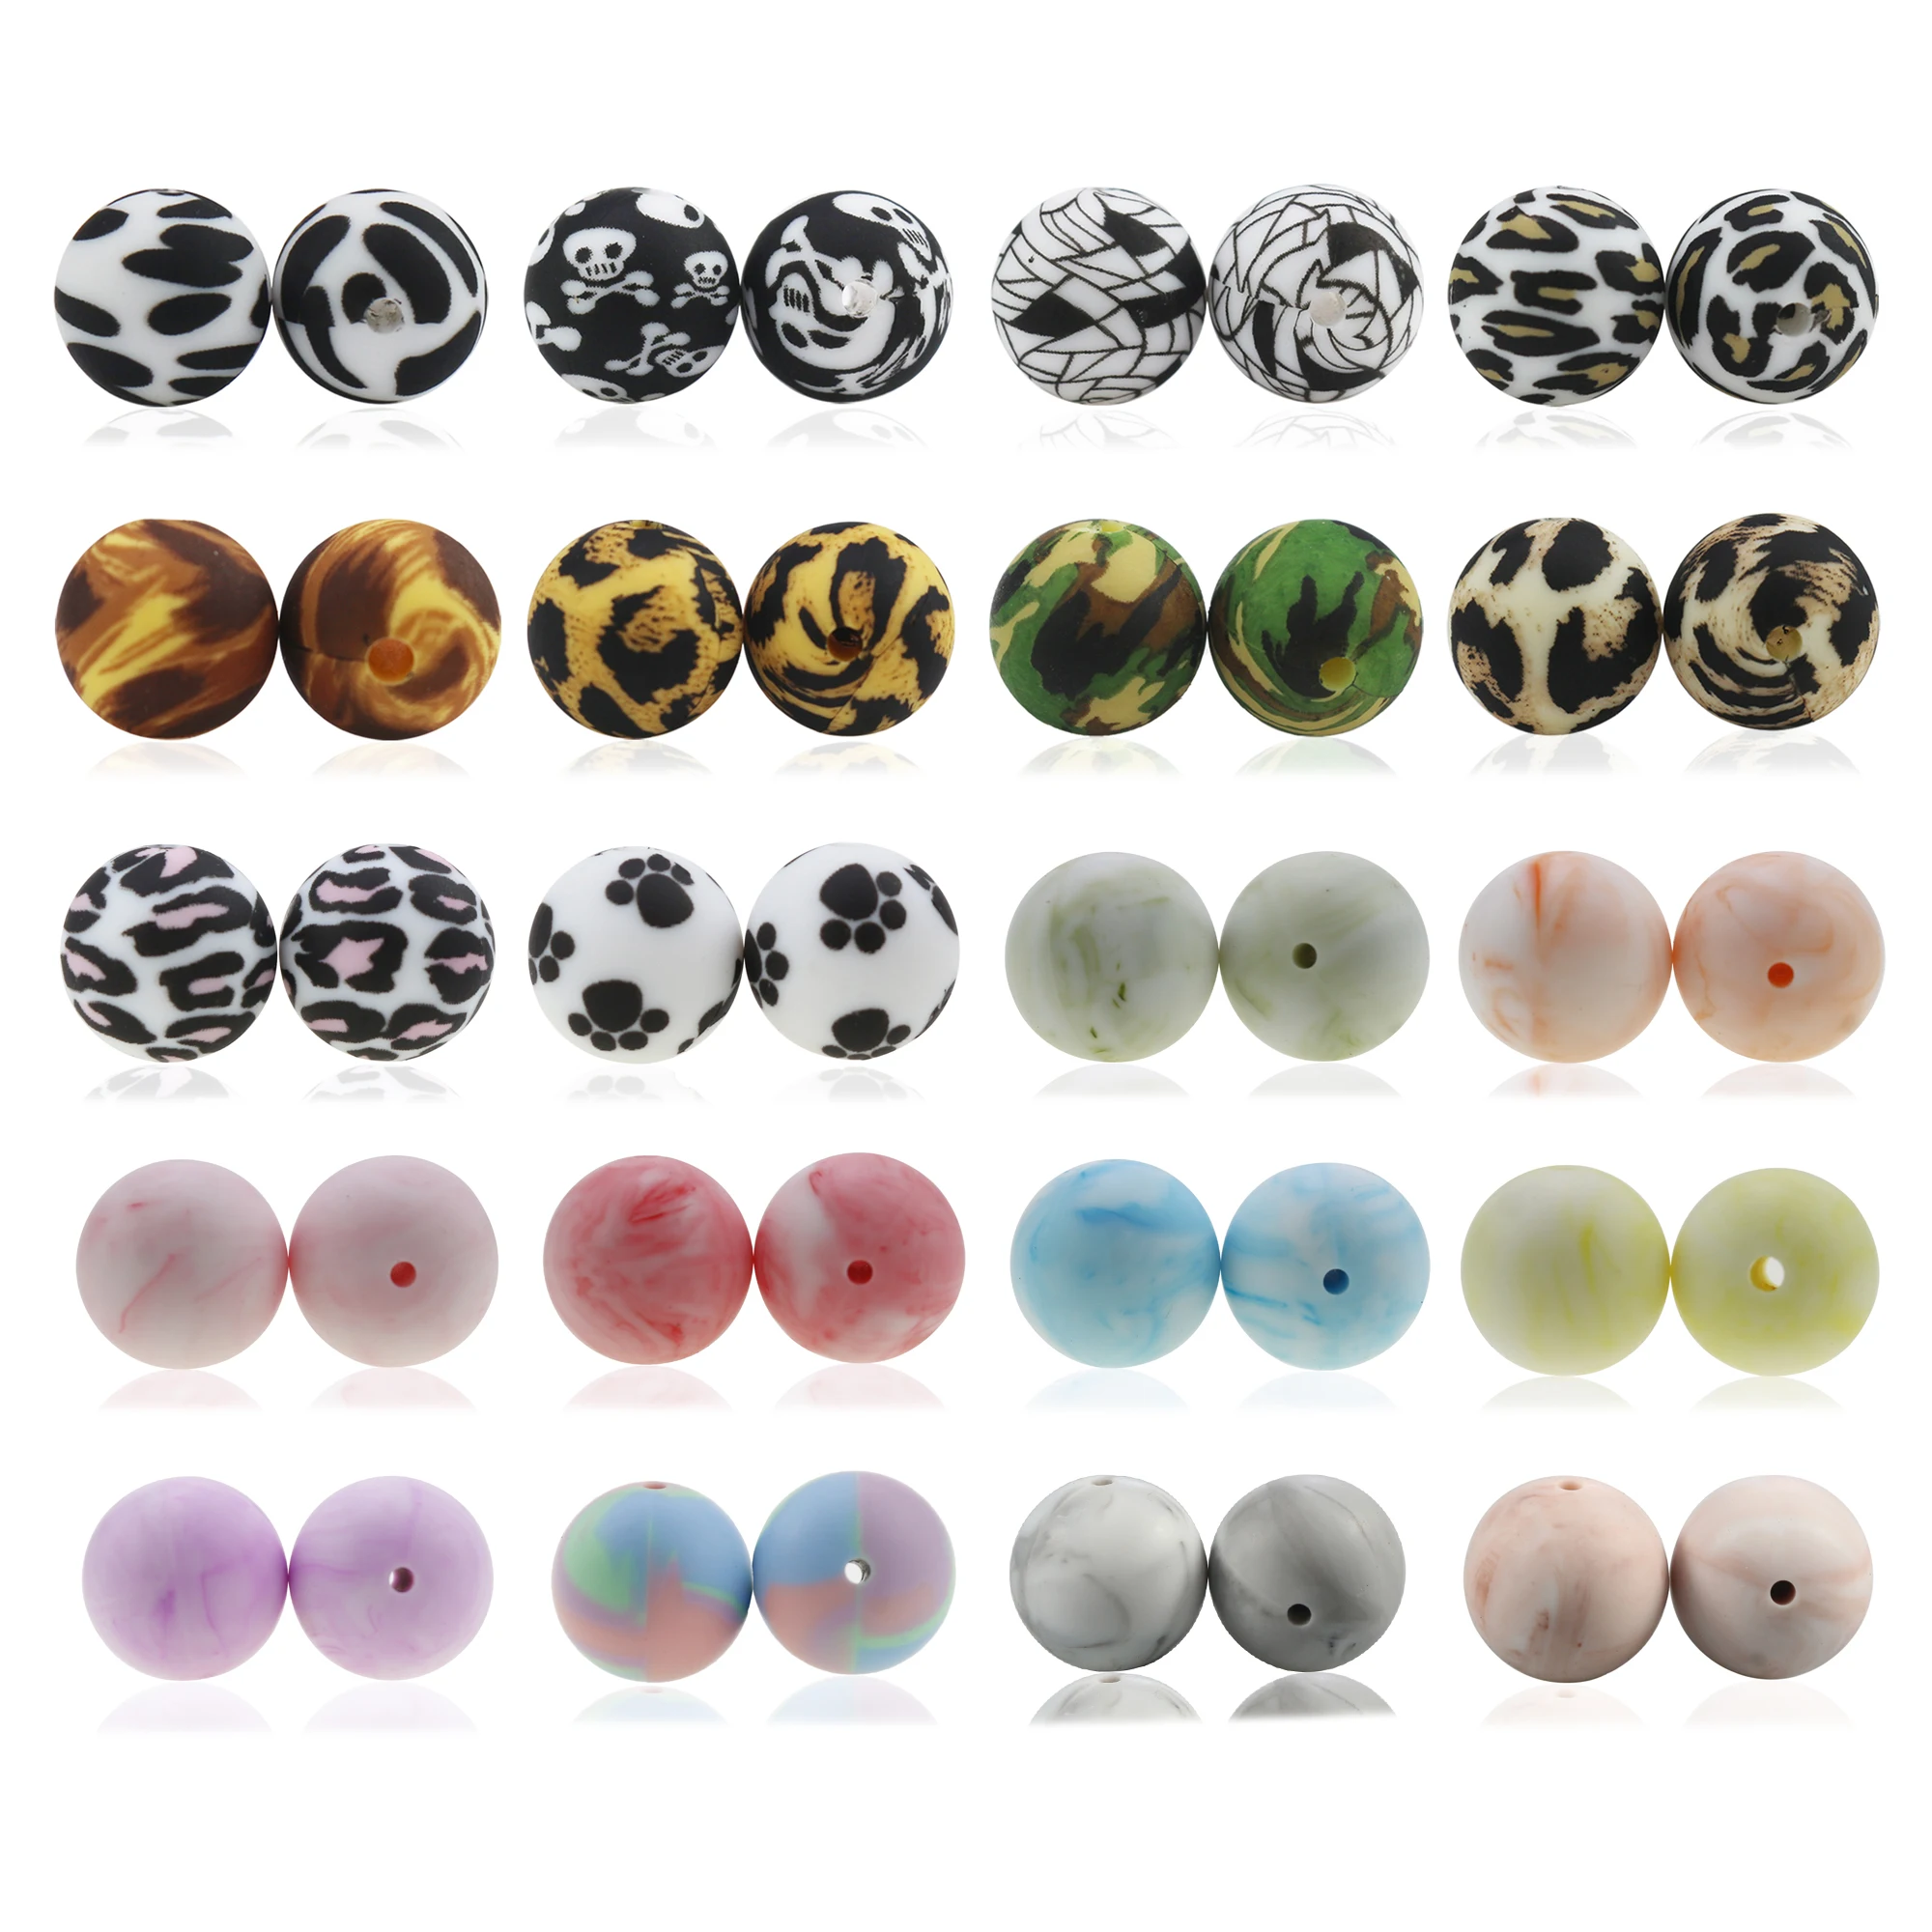 

Wholesale Mixes 12mm 15mm 19mm Leopard Print Beads BPA Free Baby Keychain Wristlet Bracelet Teething Silicone Beads